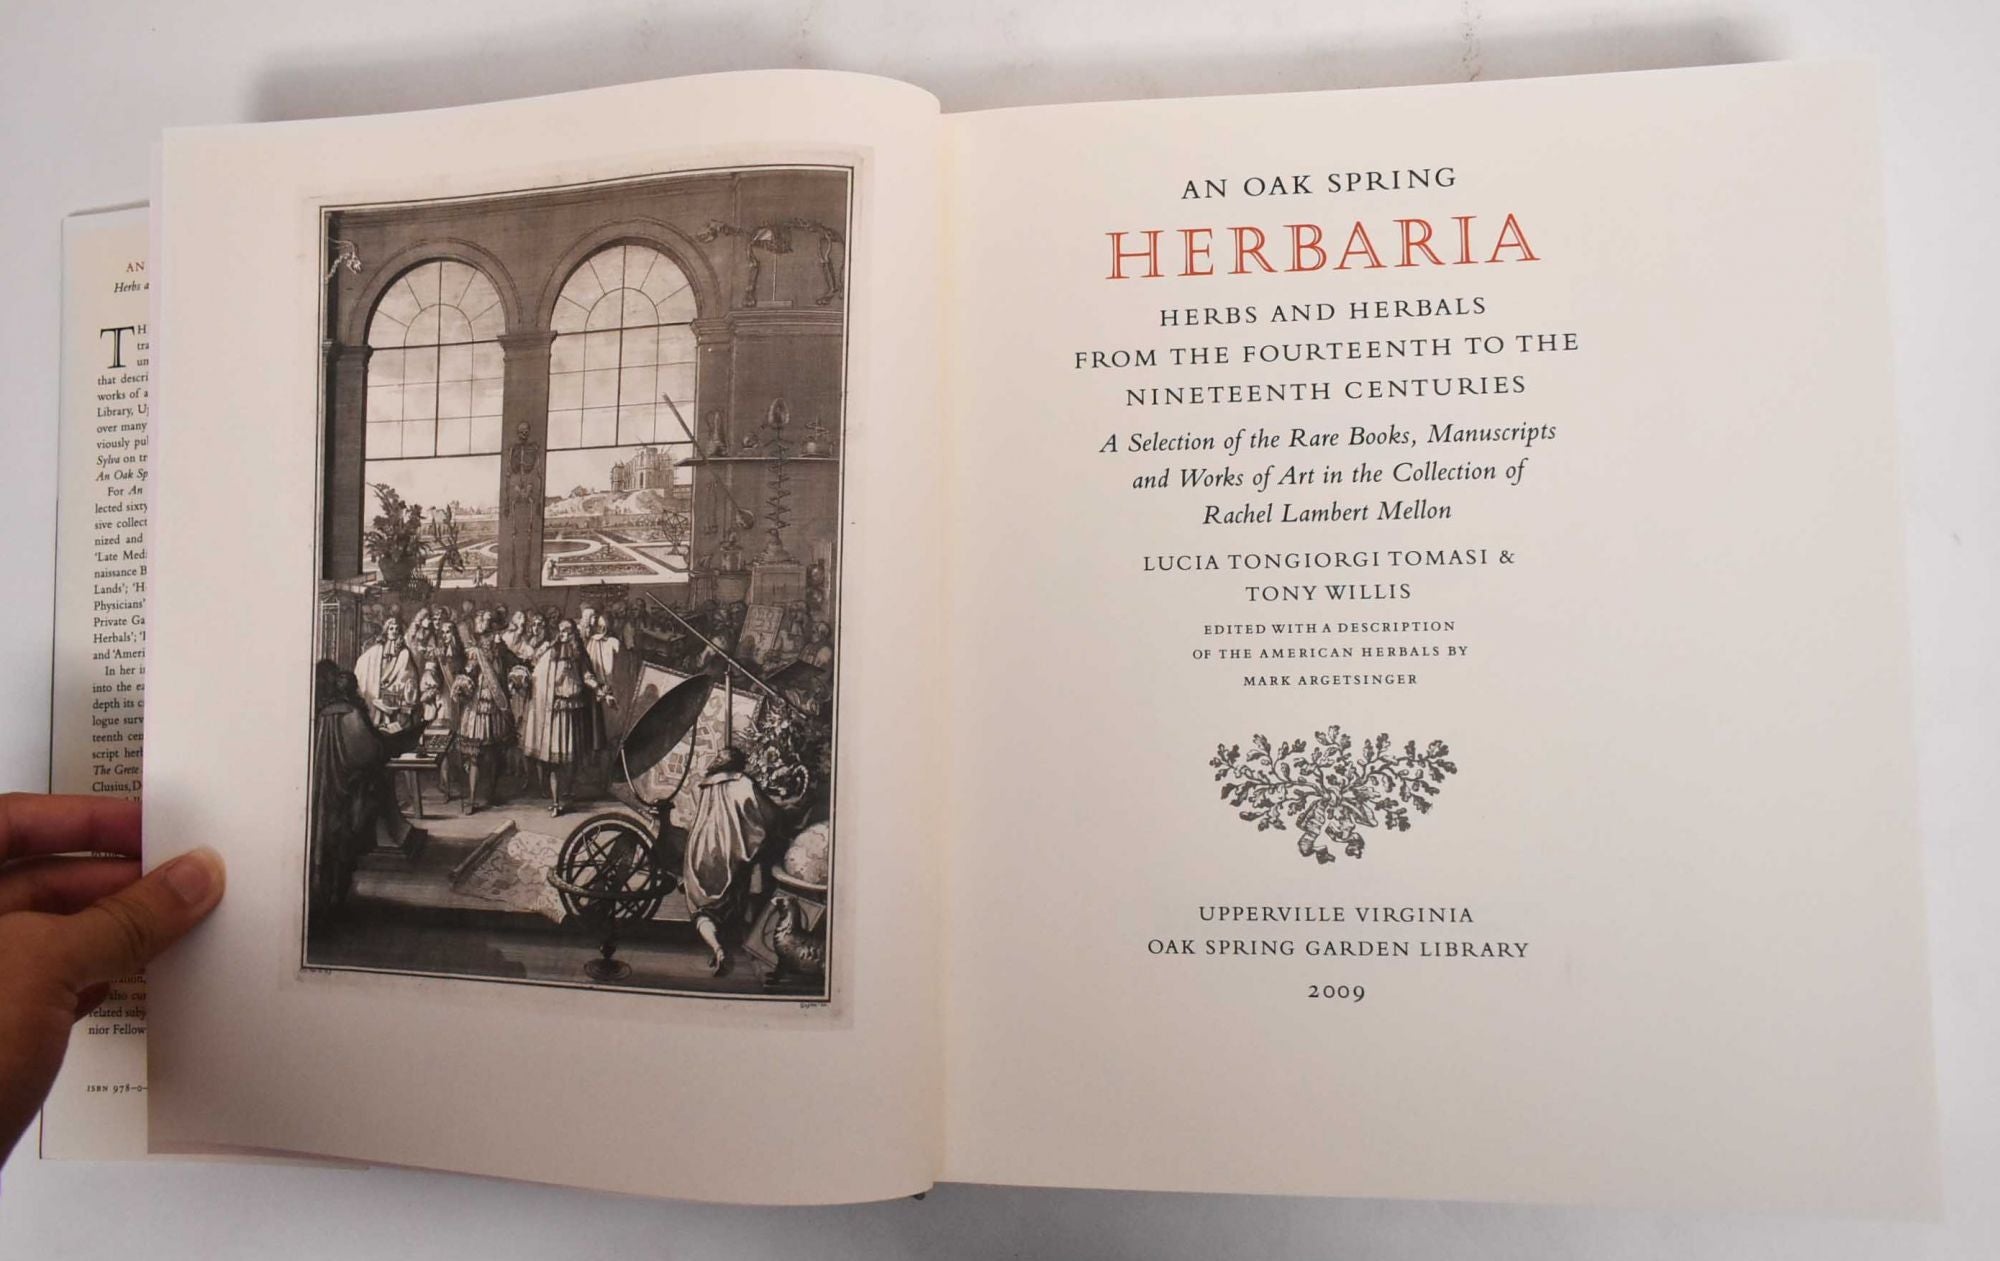 An Oak Spring Herbaria: Herbs and Herbals from the Fourteenth to